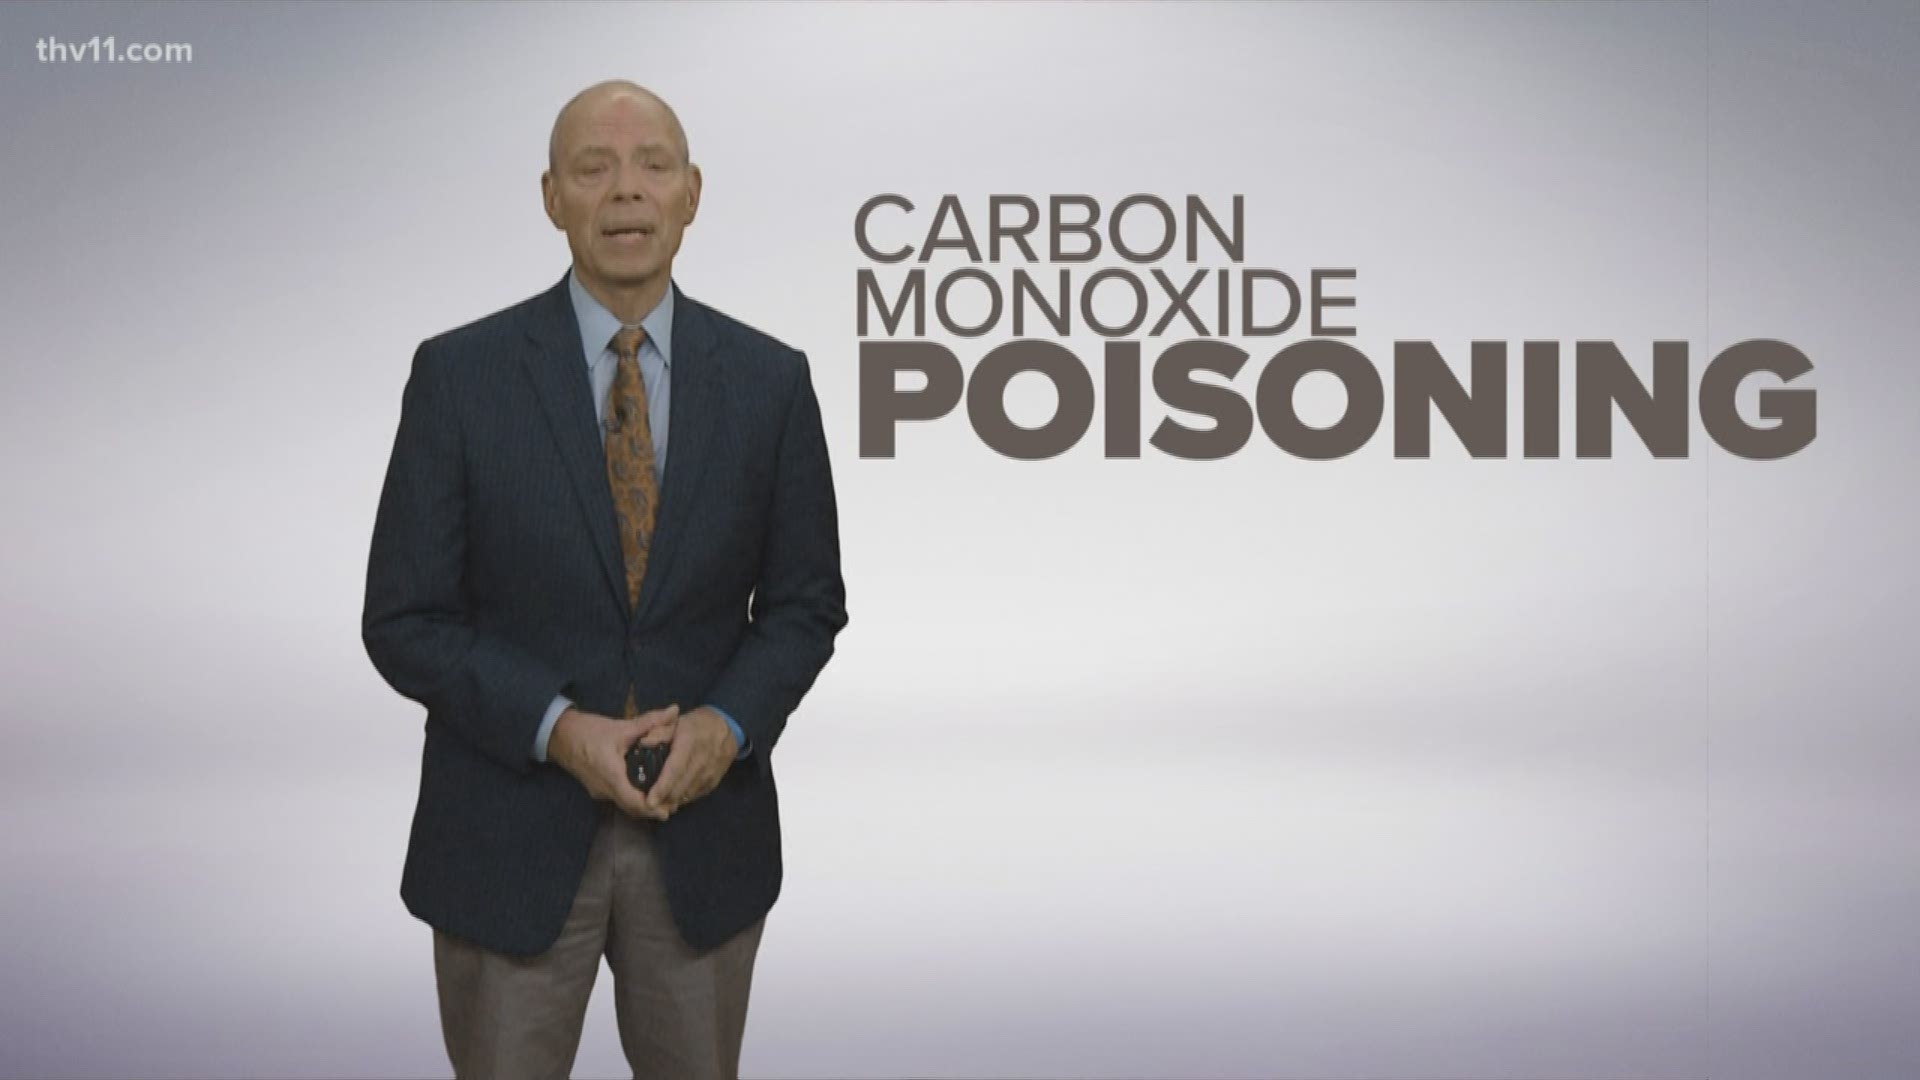 A deadly gas that you can't see, or smell: carbon monoxide.